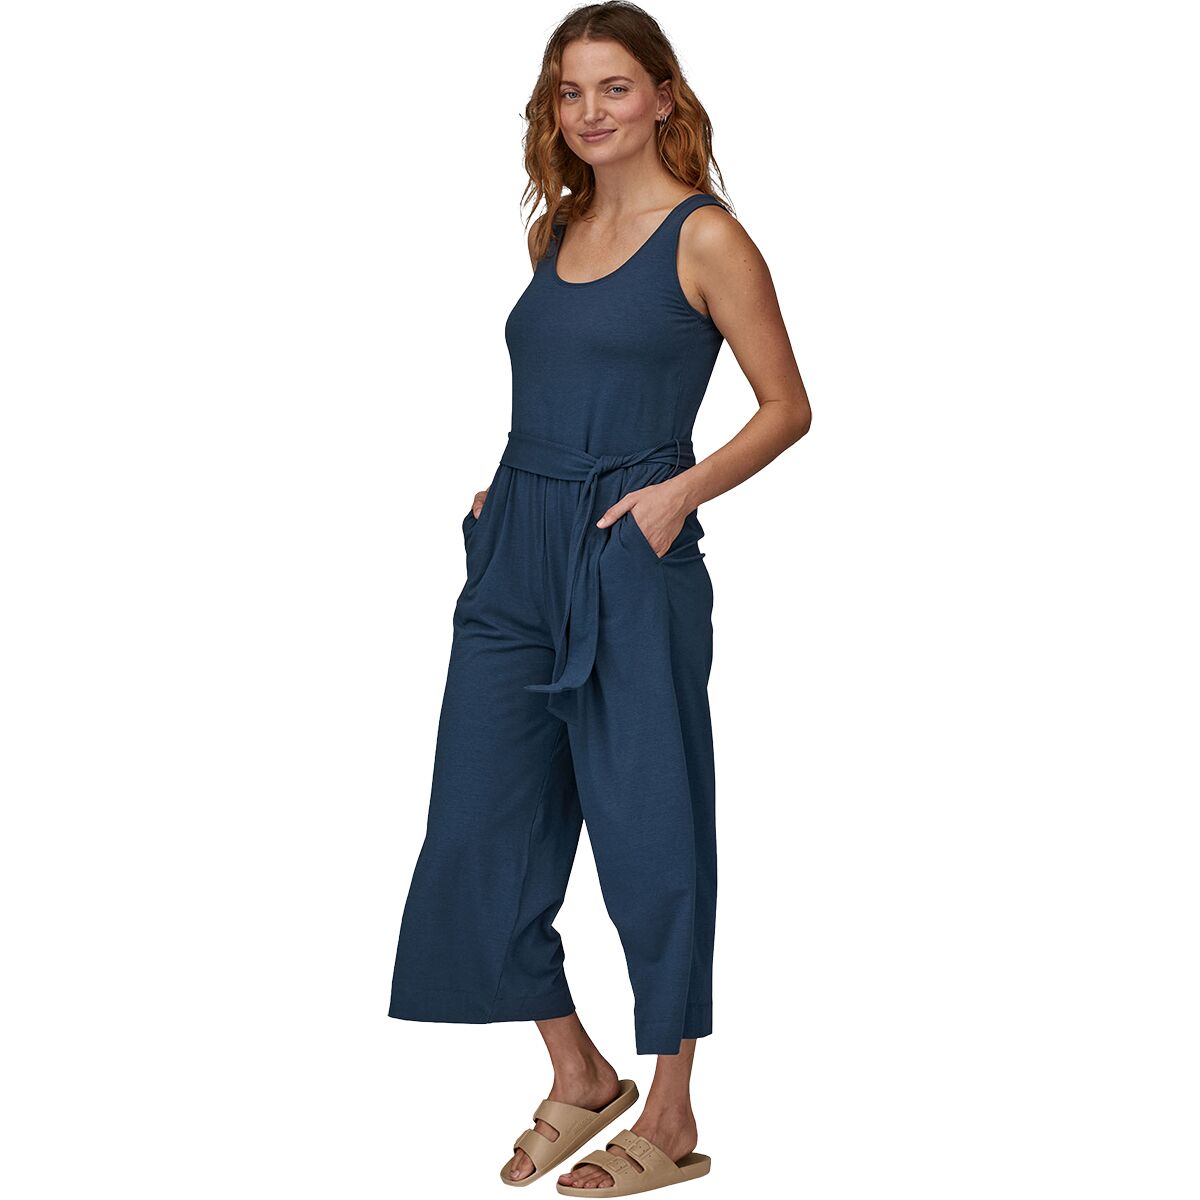 Patagonia - Women's Jumpsuits, Rompers and Bodysuits